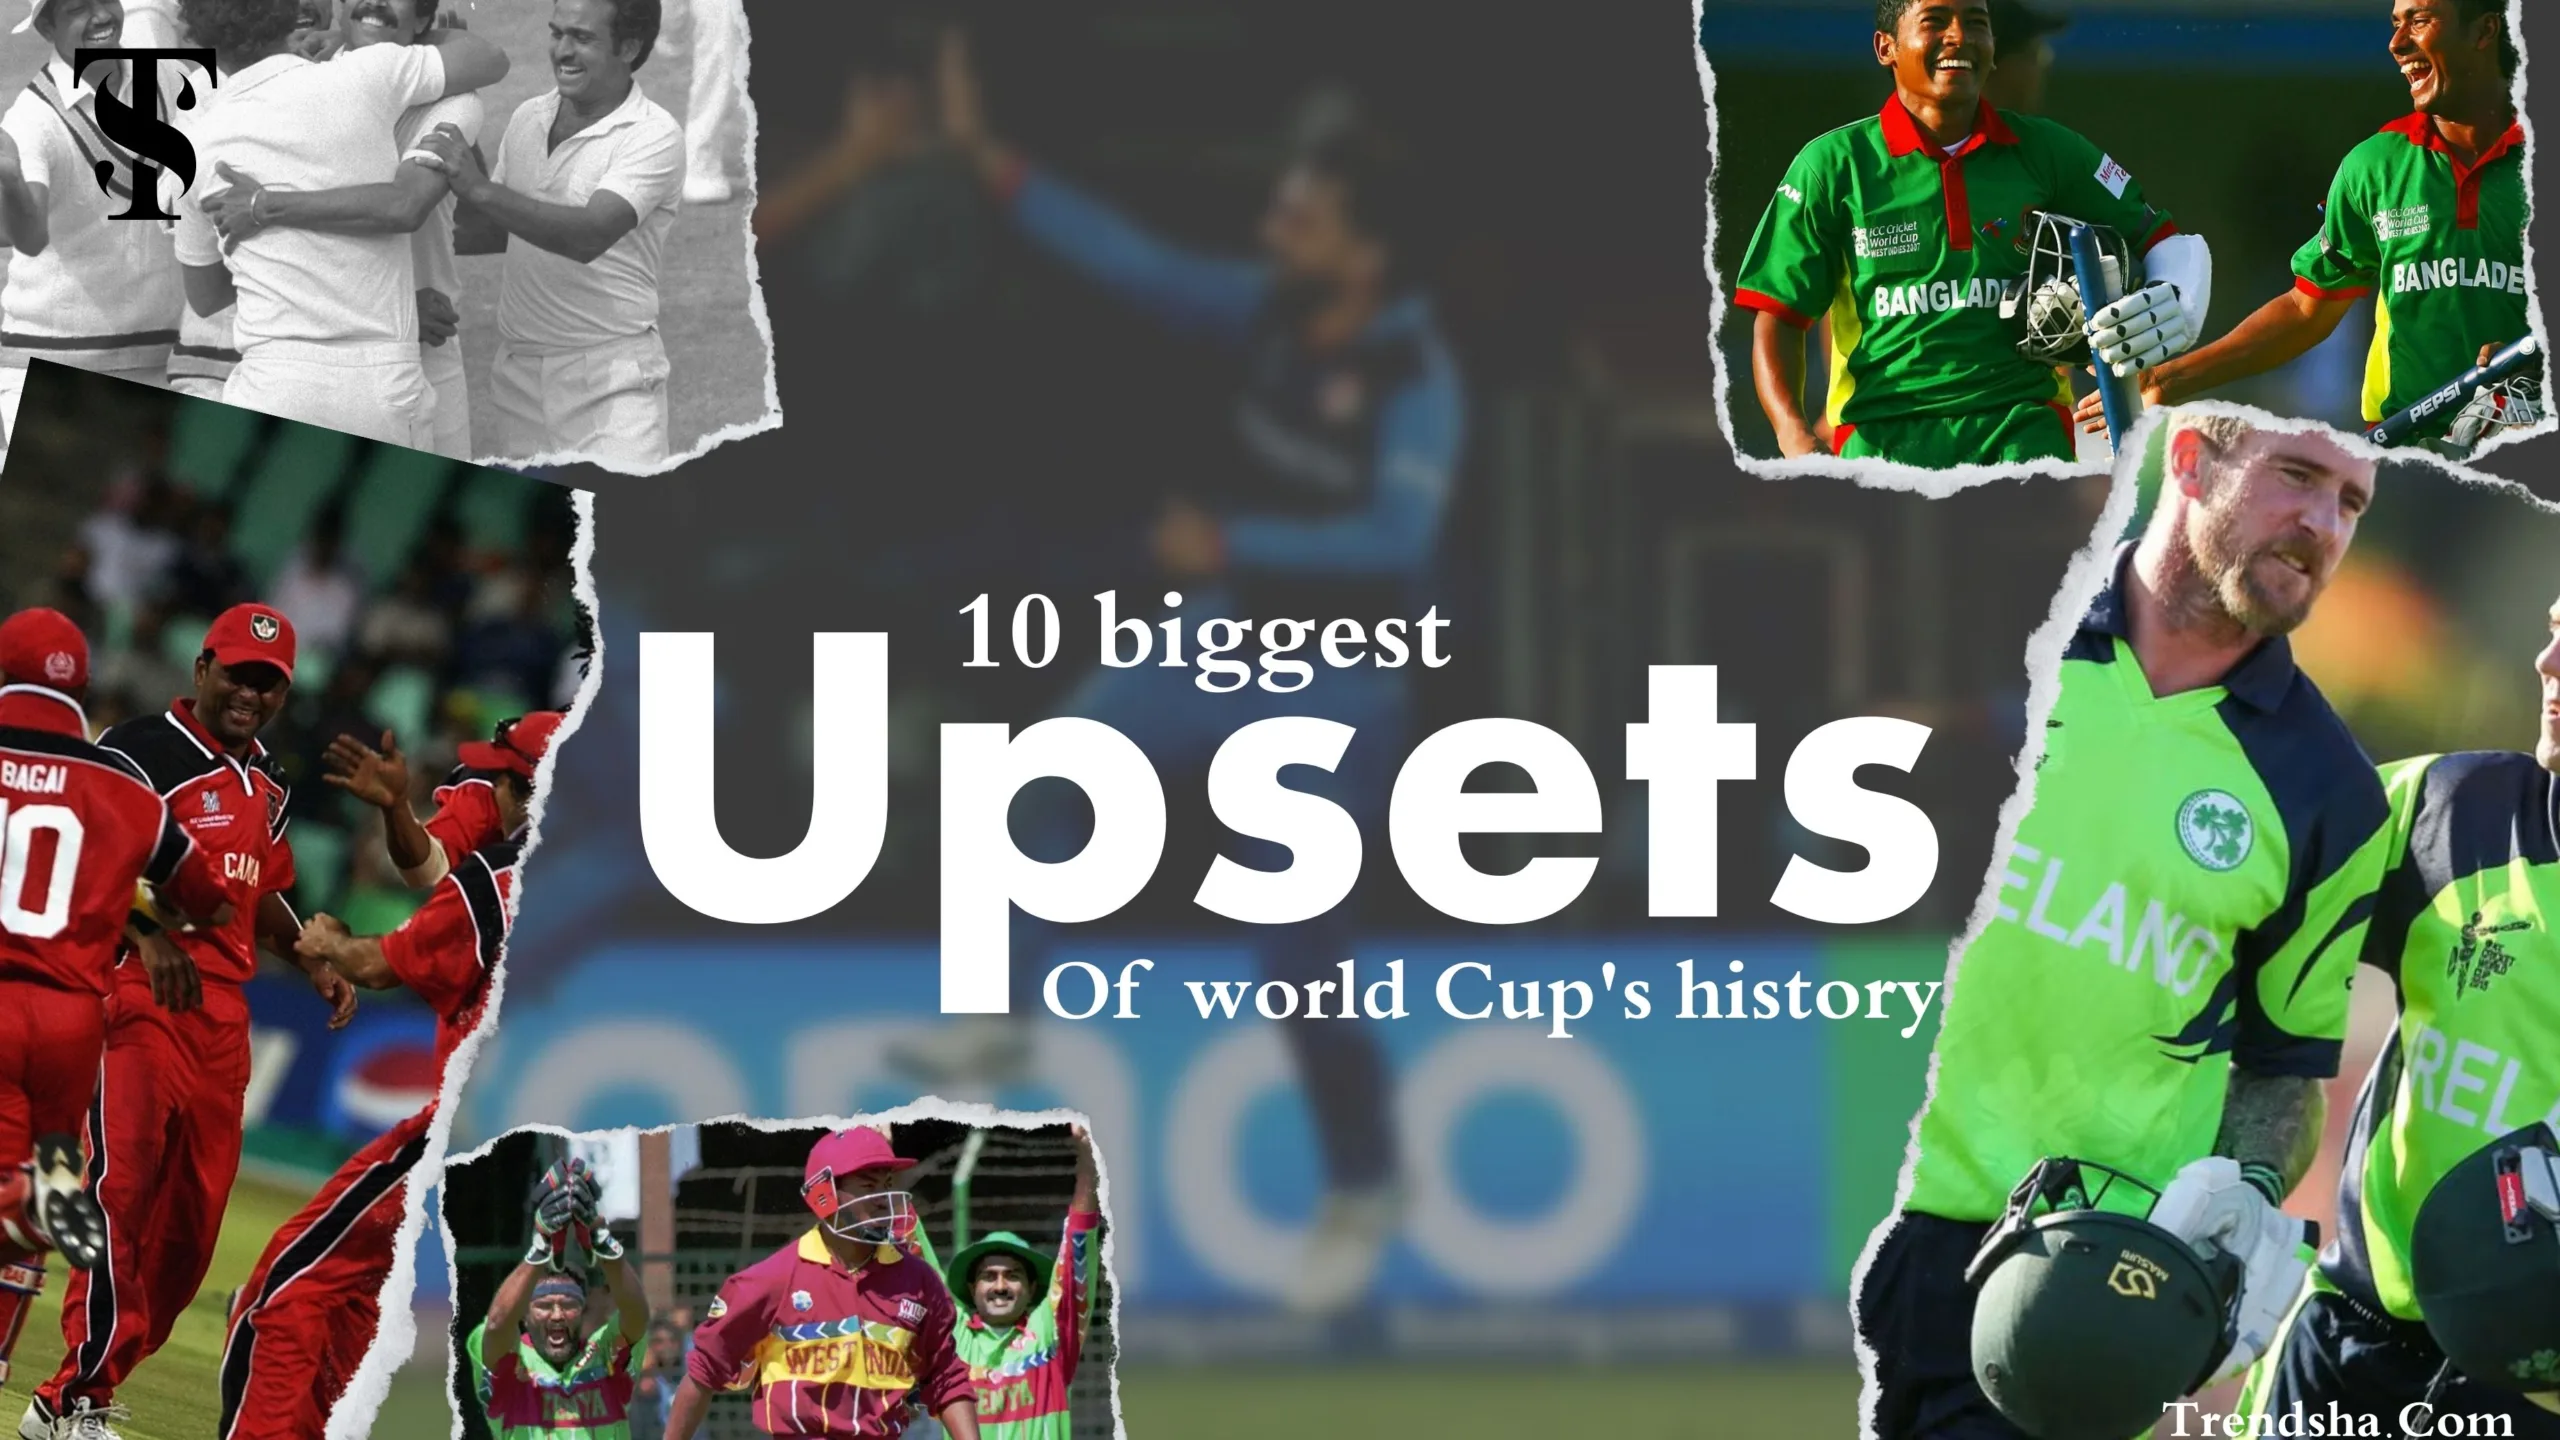 The biggest upsets in the ODI World Cup's history